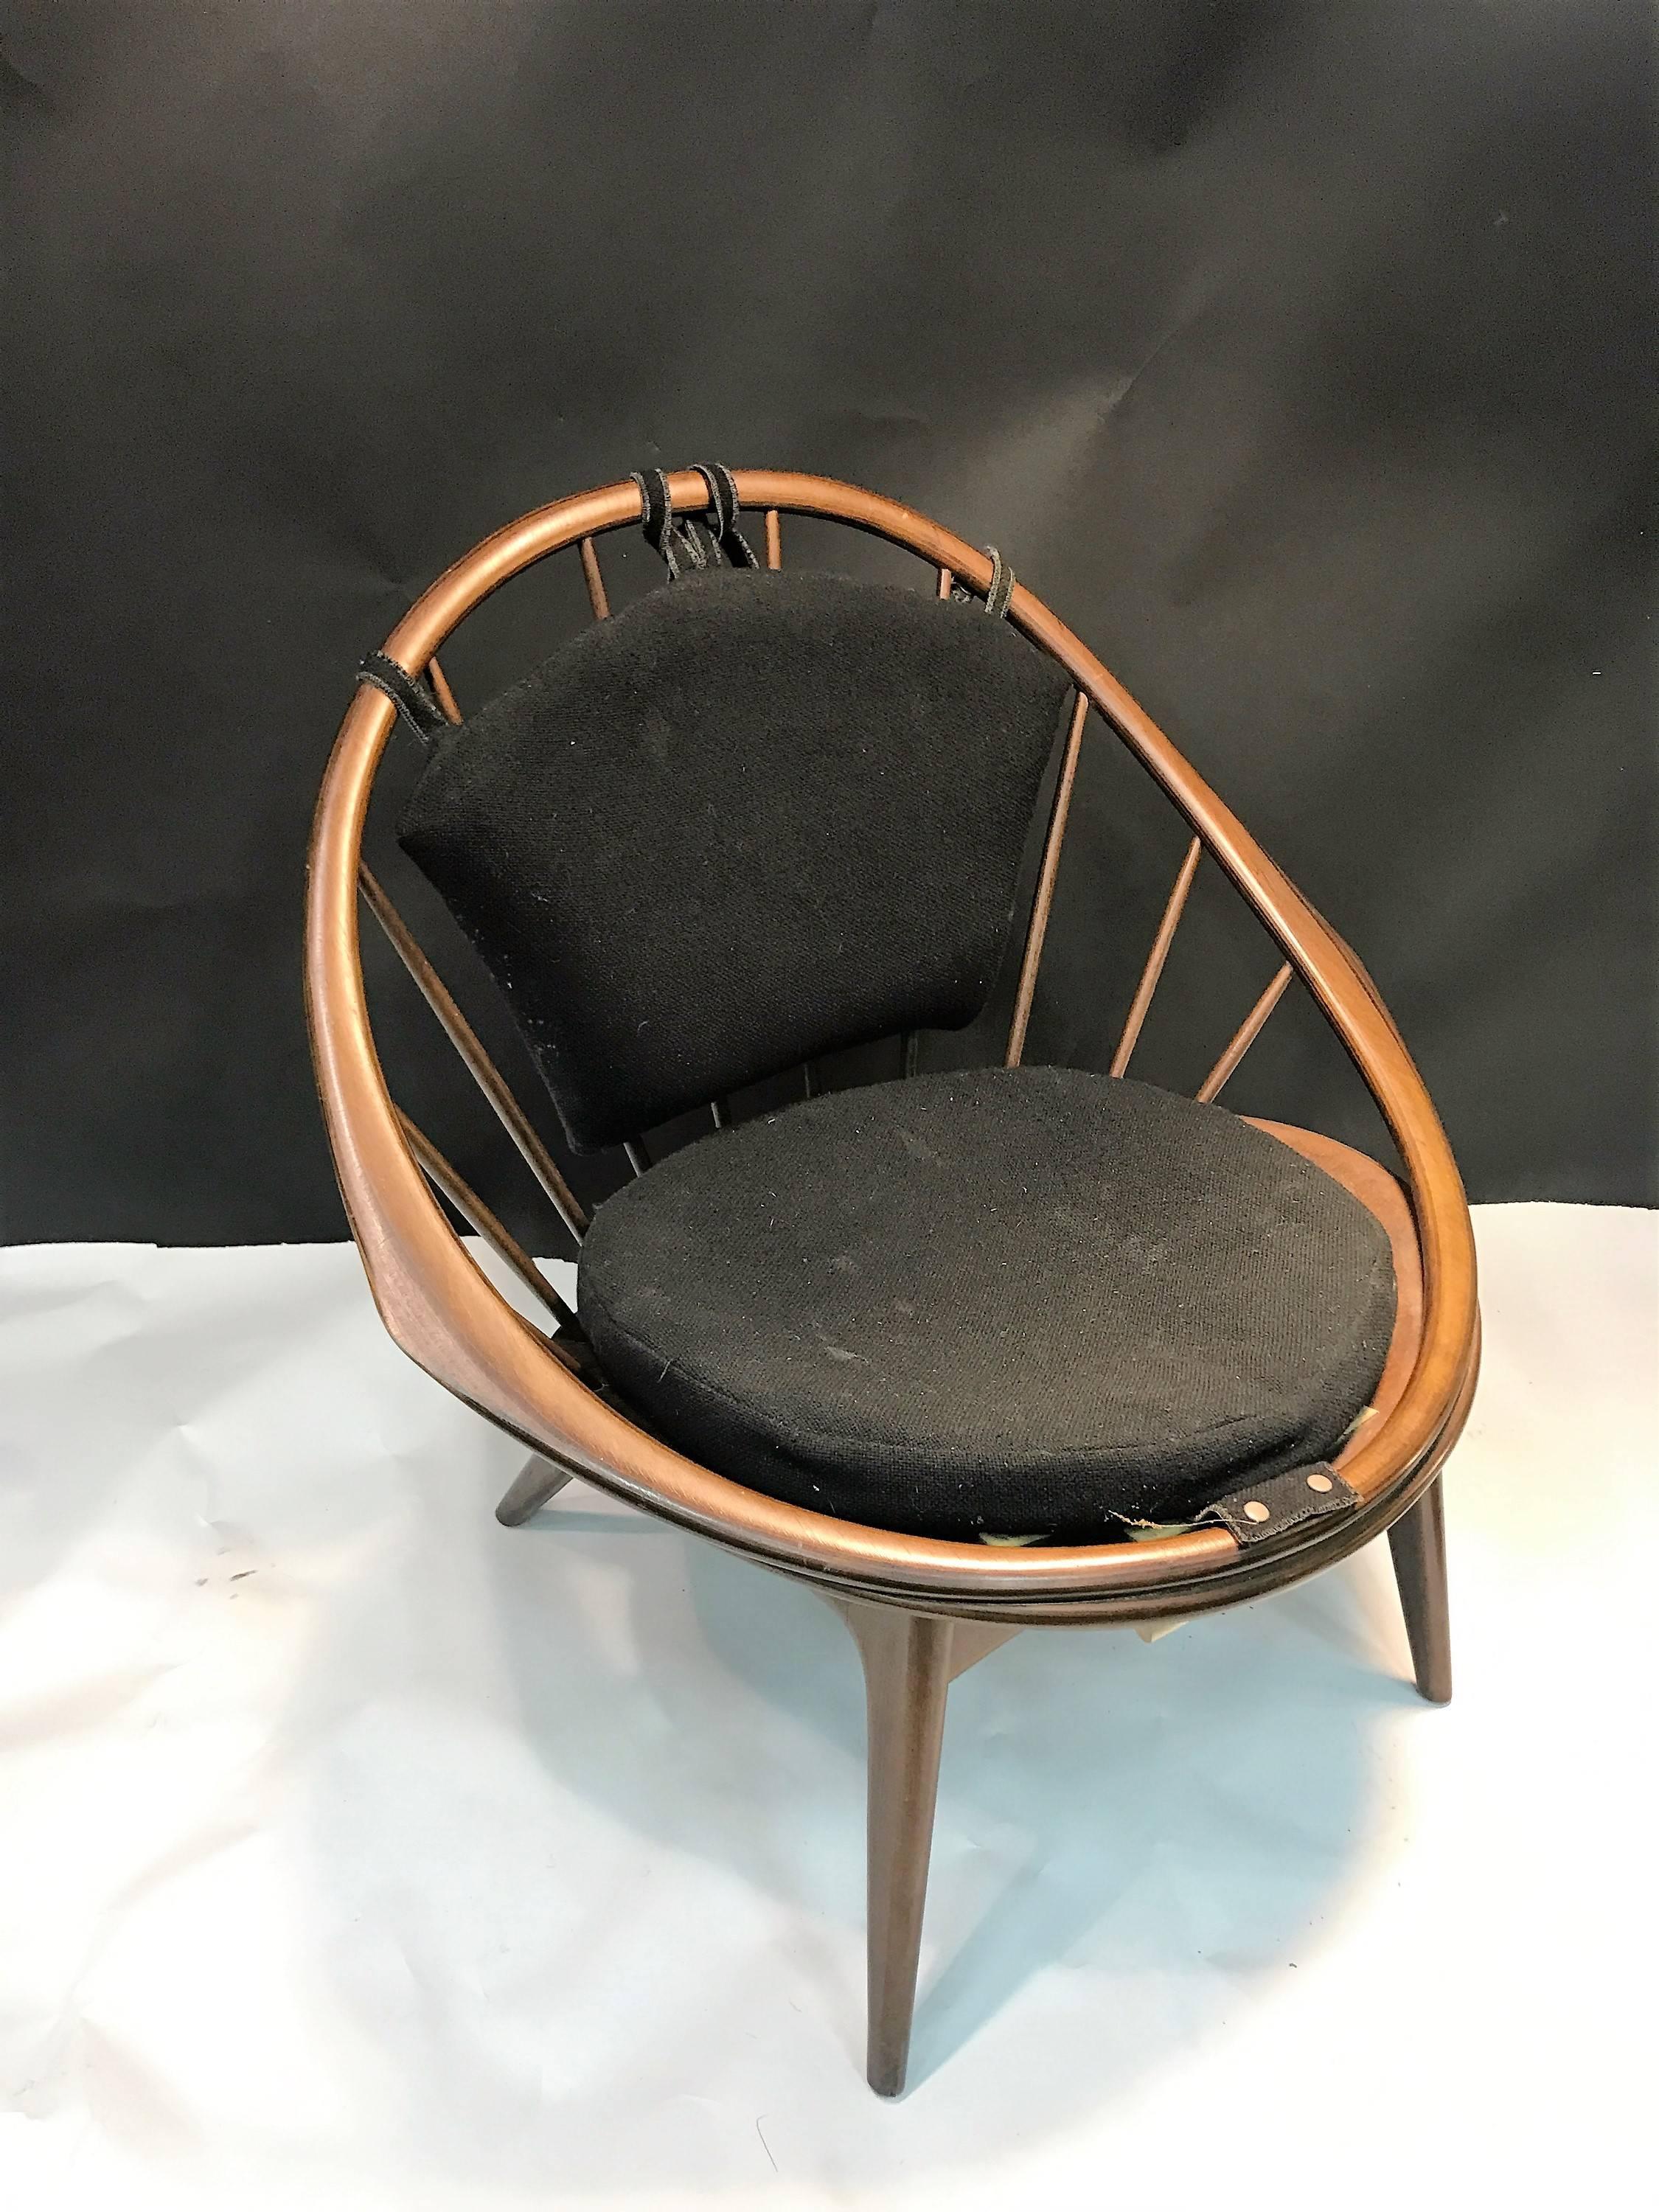 Round form with spoke back sculptural chair with four dowel legs designed in the 1960s-1970s. Would be perfect in your Mid-Century interior.